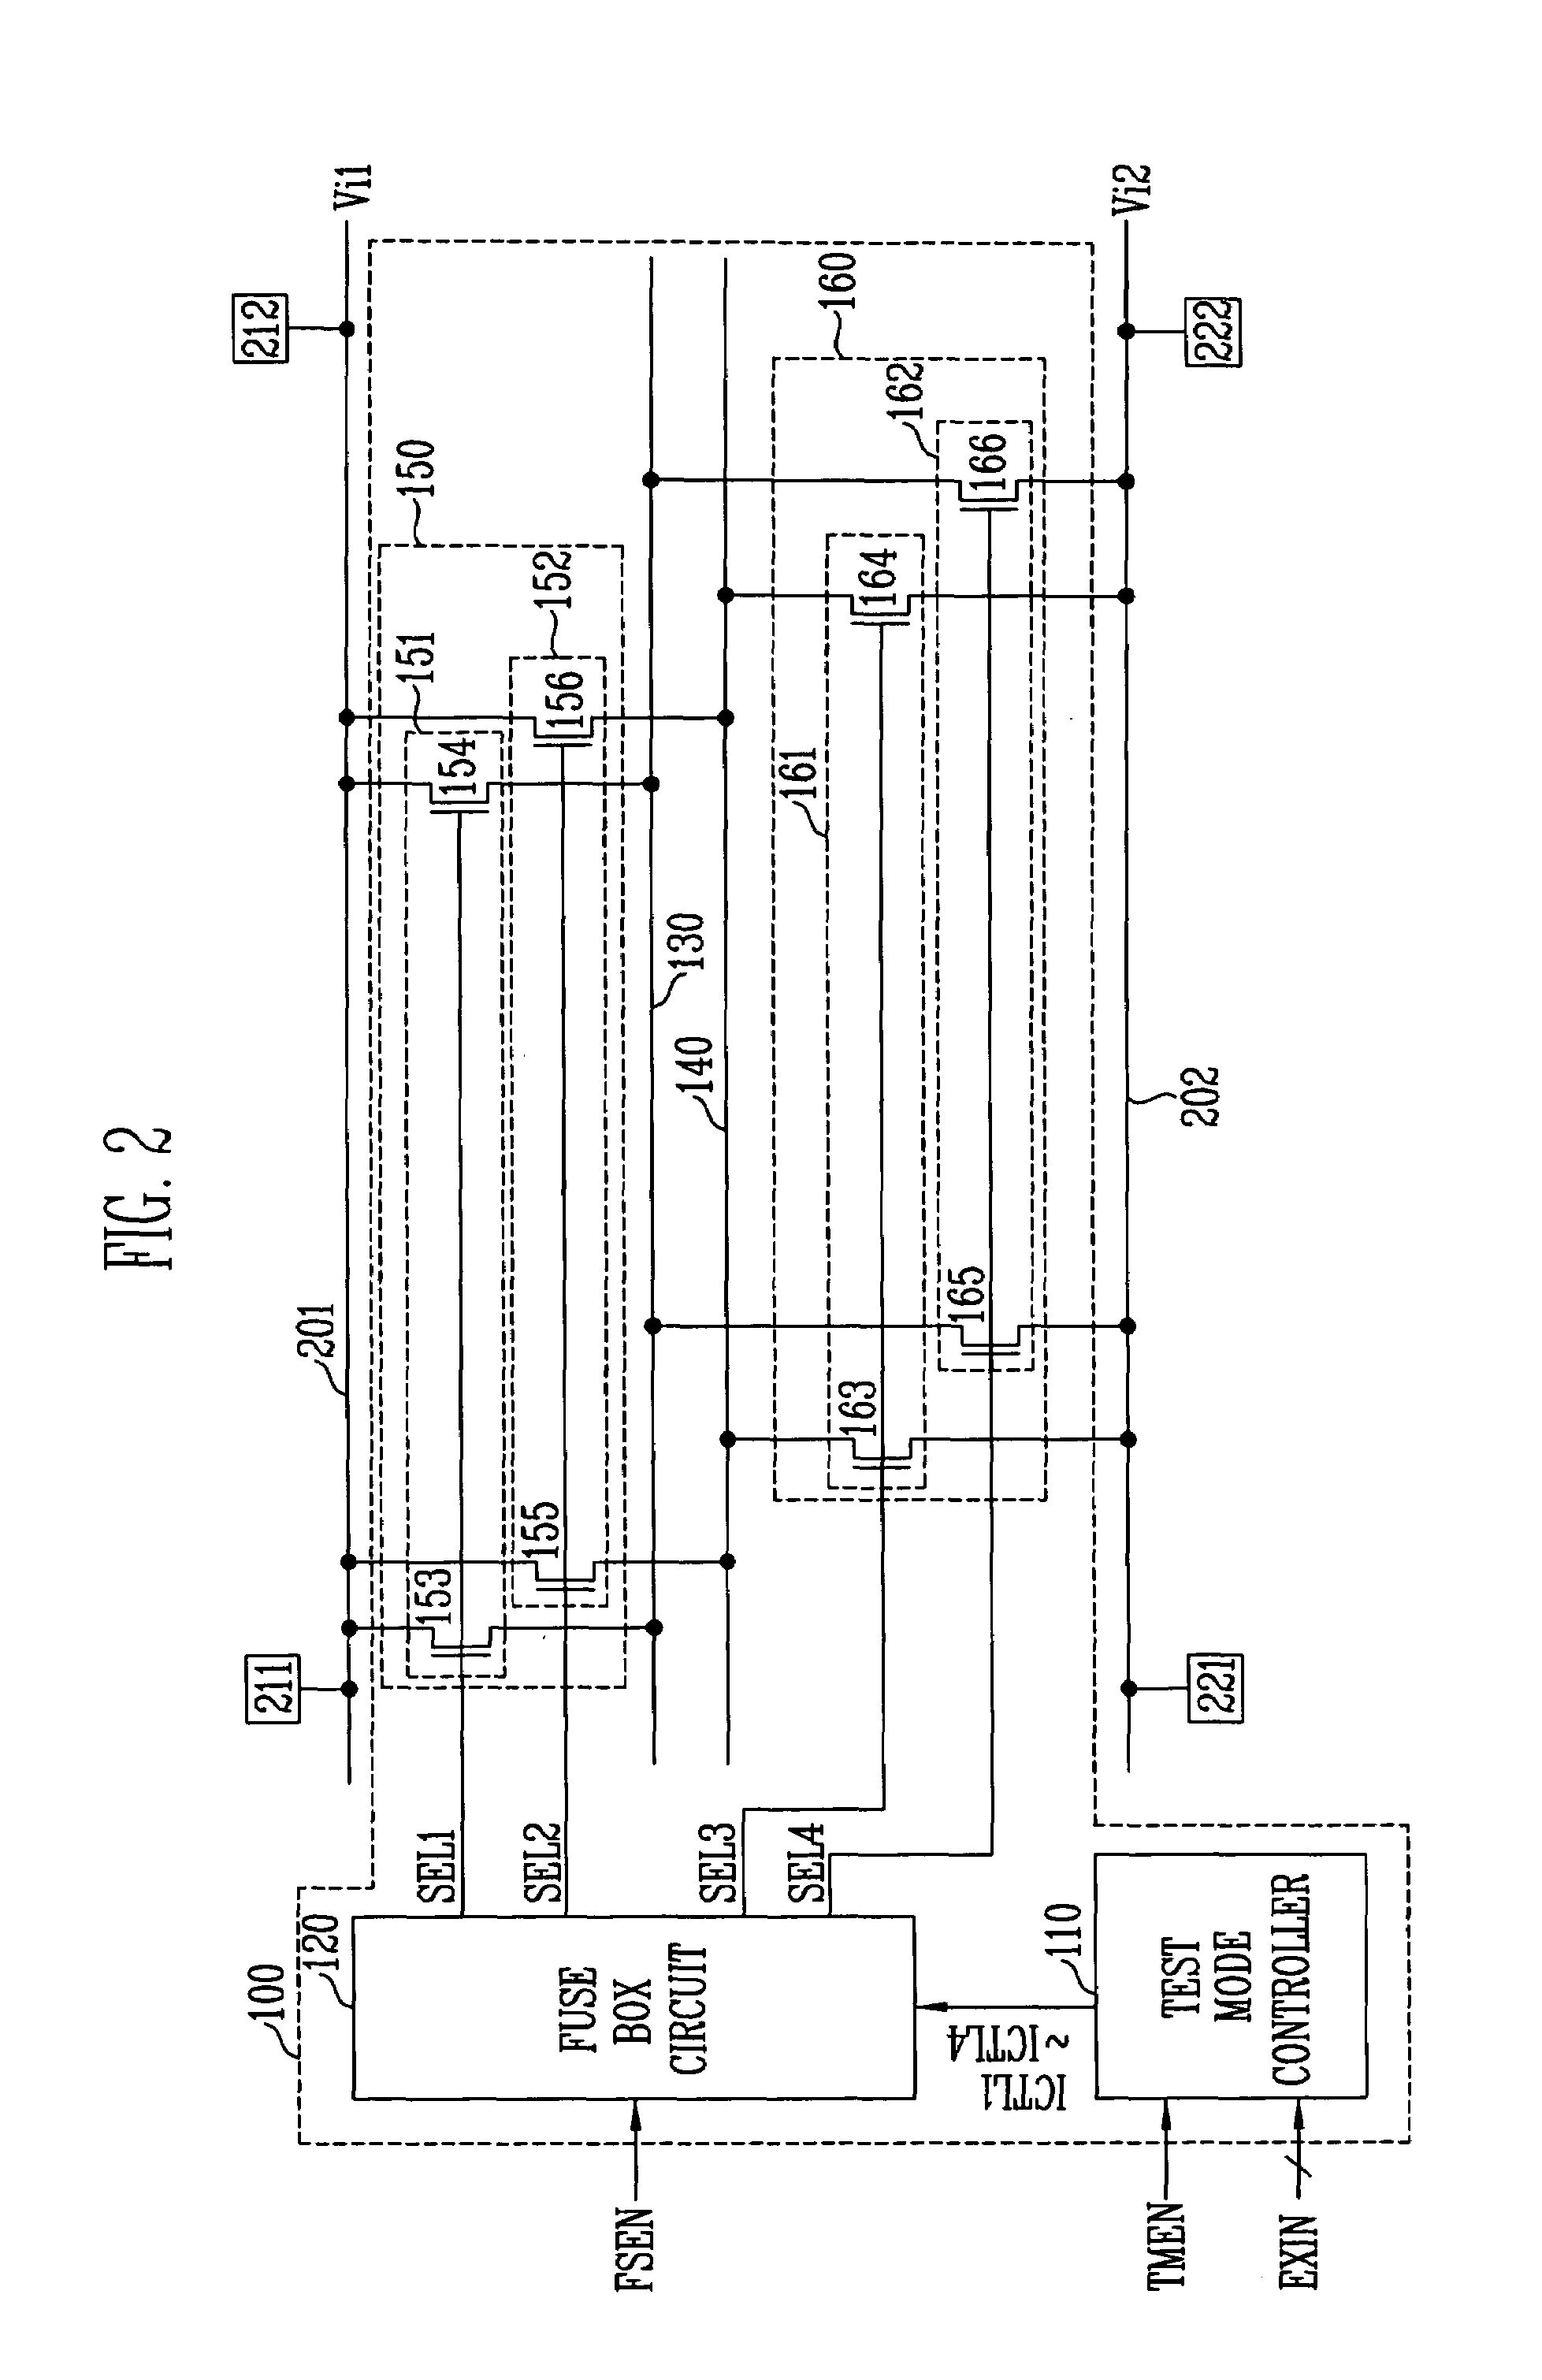 Power line control circuit of semiconductor device